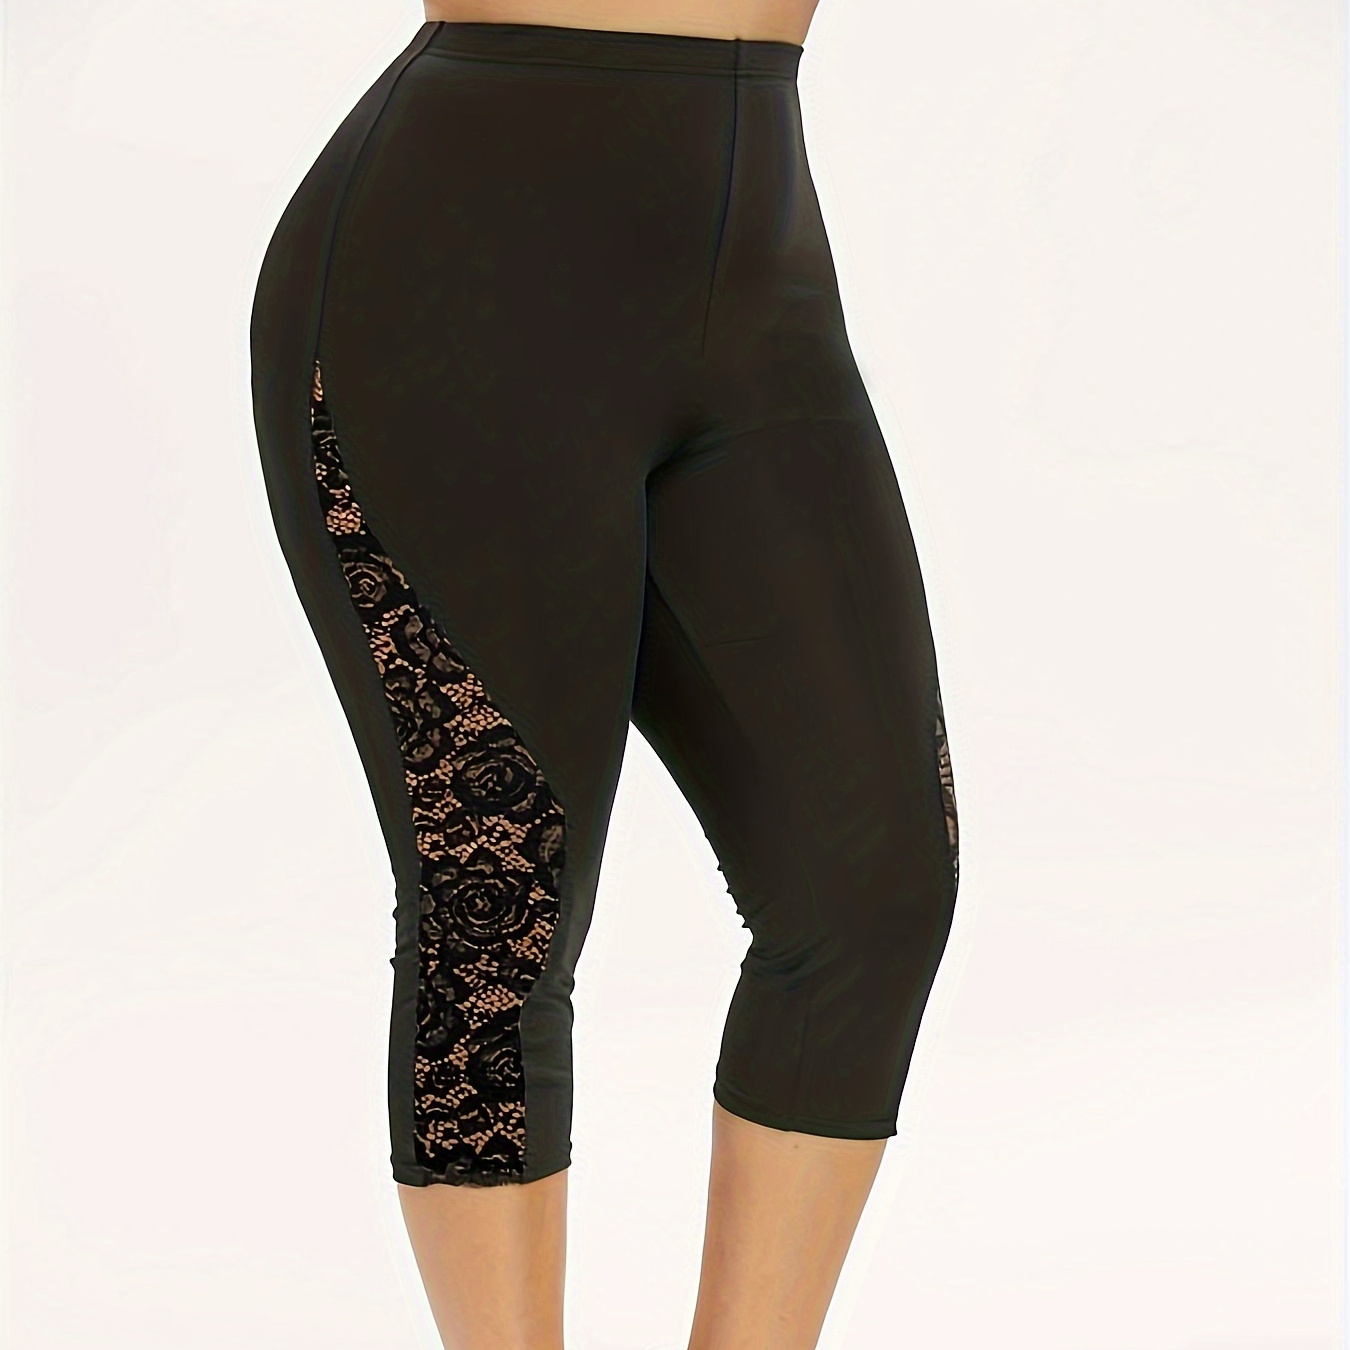 

Plus Size Floral Lace Stitching Capri Leggings, Casual High Waist Stretchy Leggings For Spring & Summer, Women's Plus Size Clothing